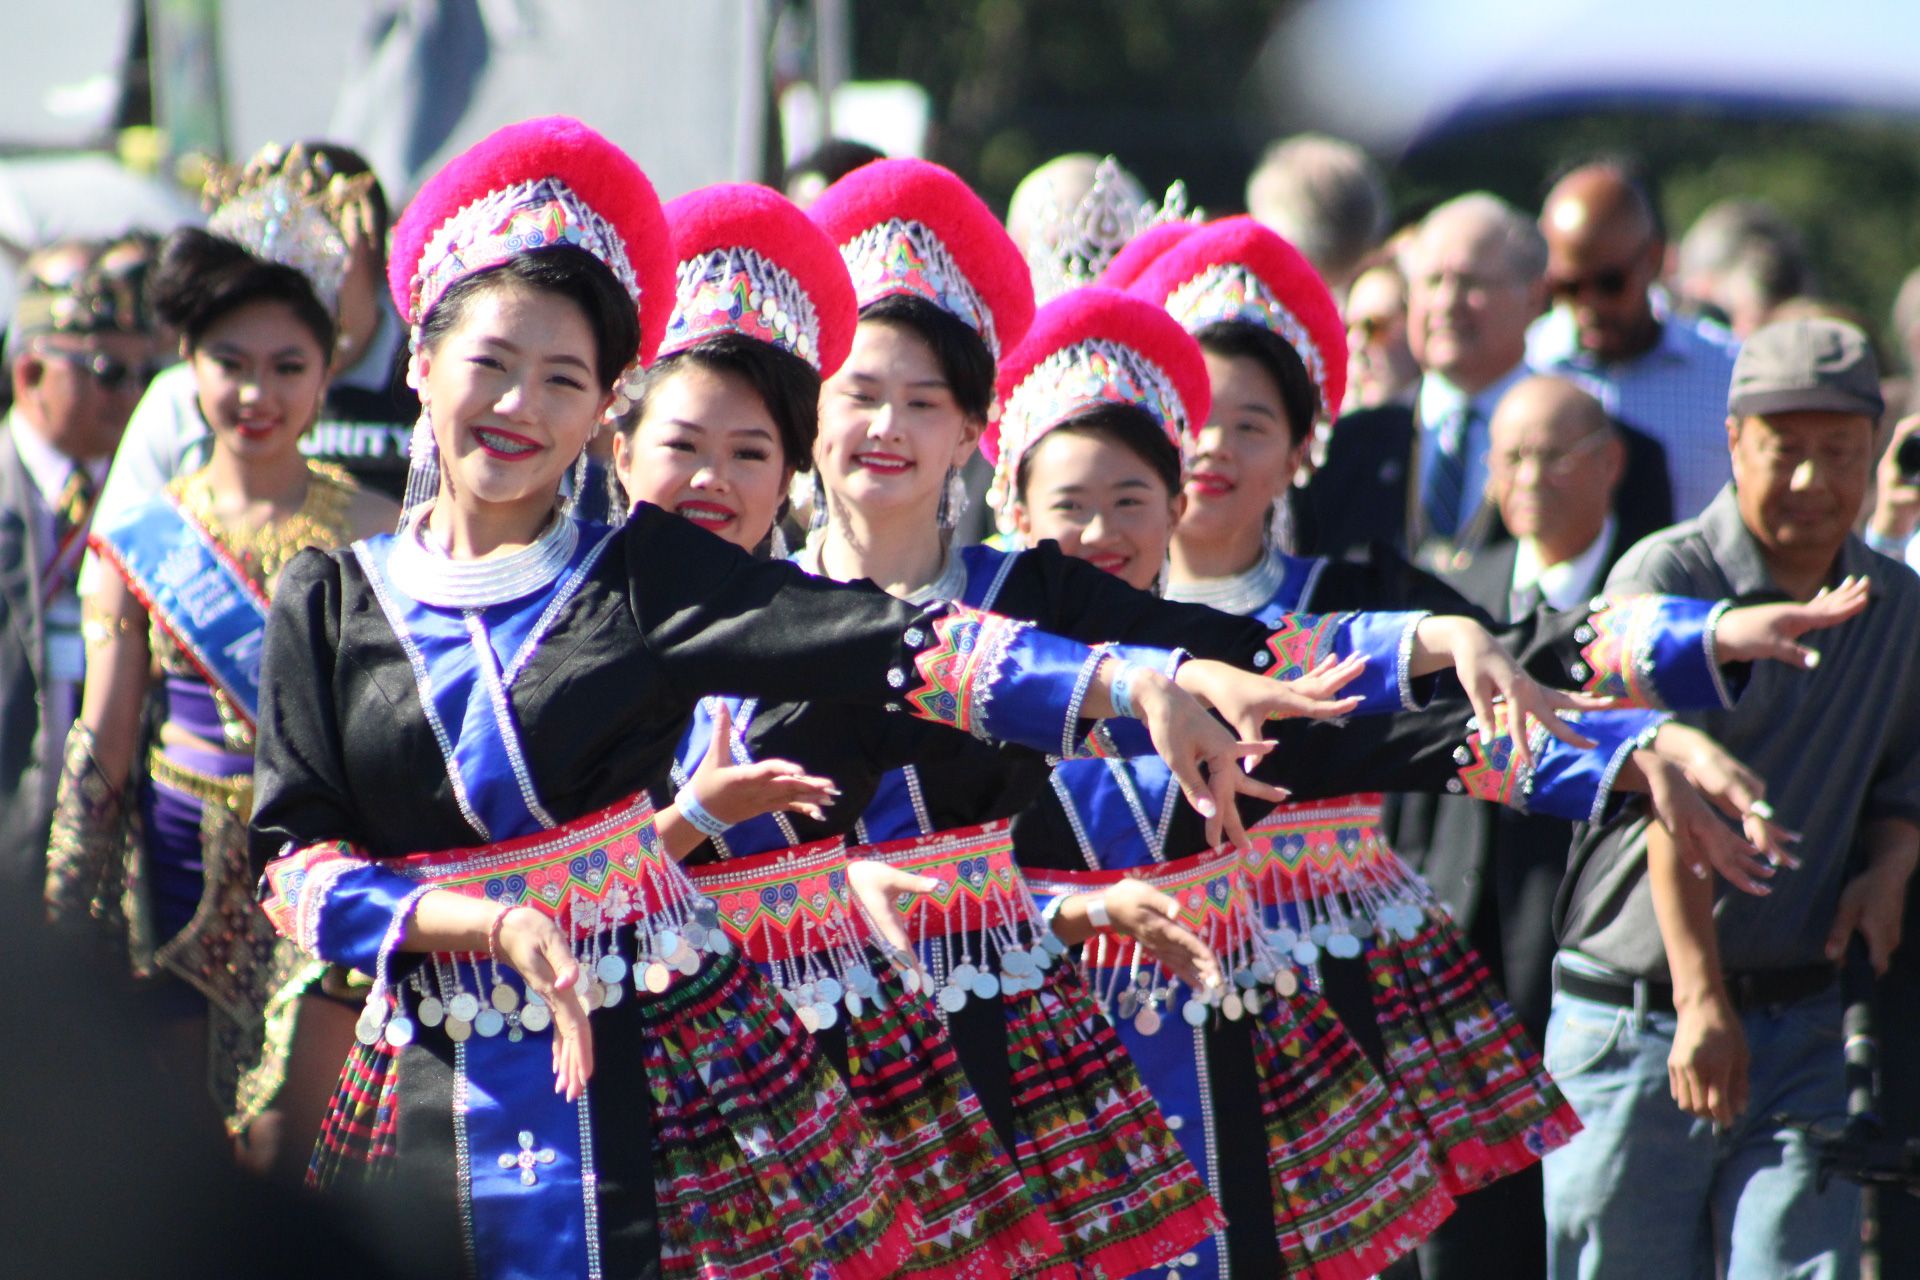 A group og smiling young women performing in traditional Hmong clothing